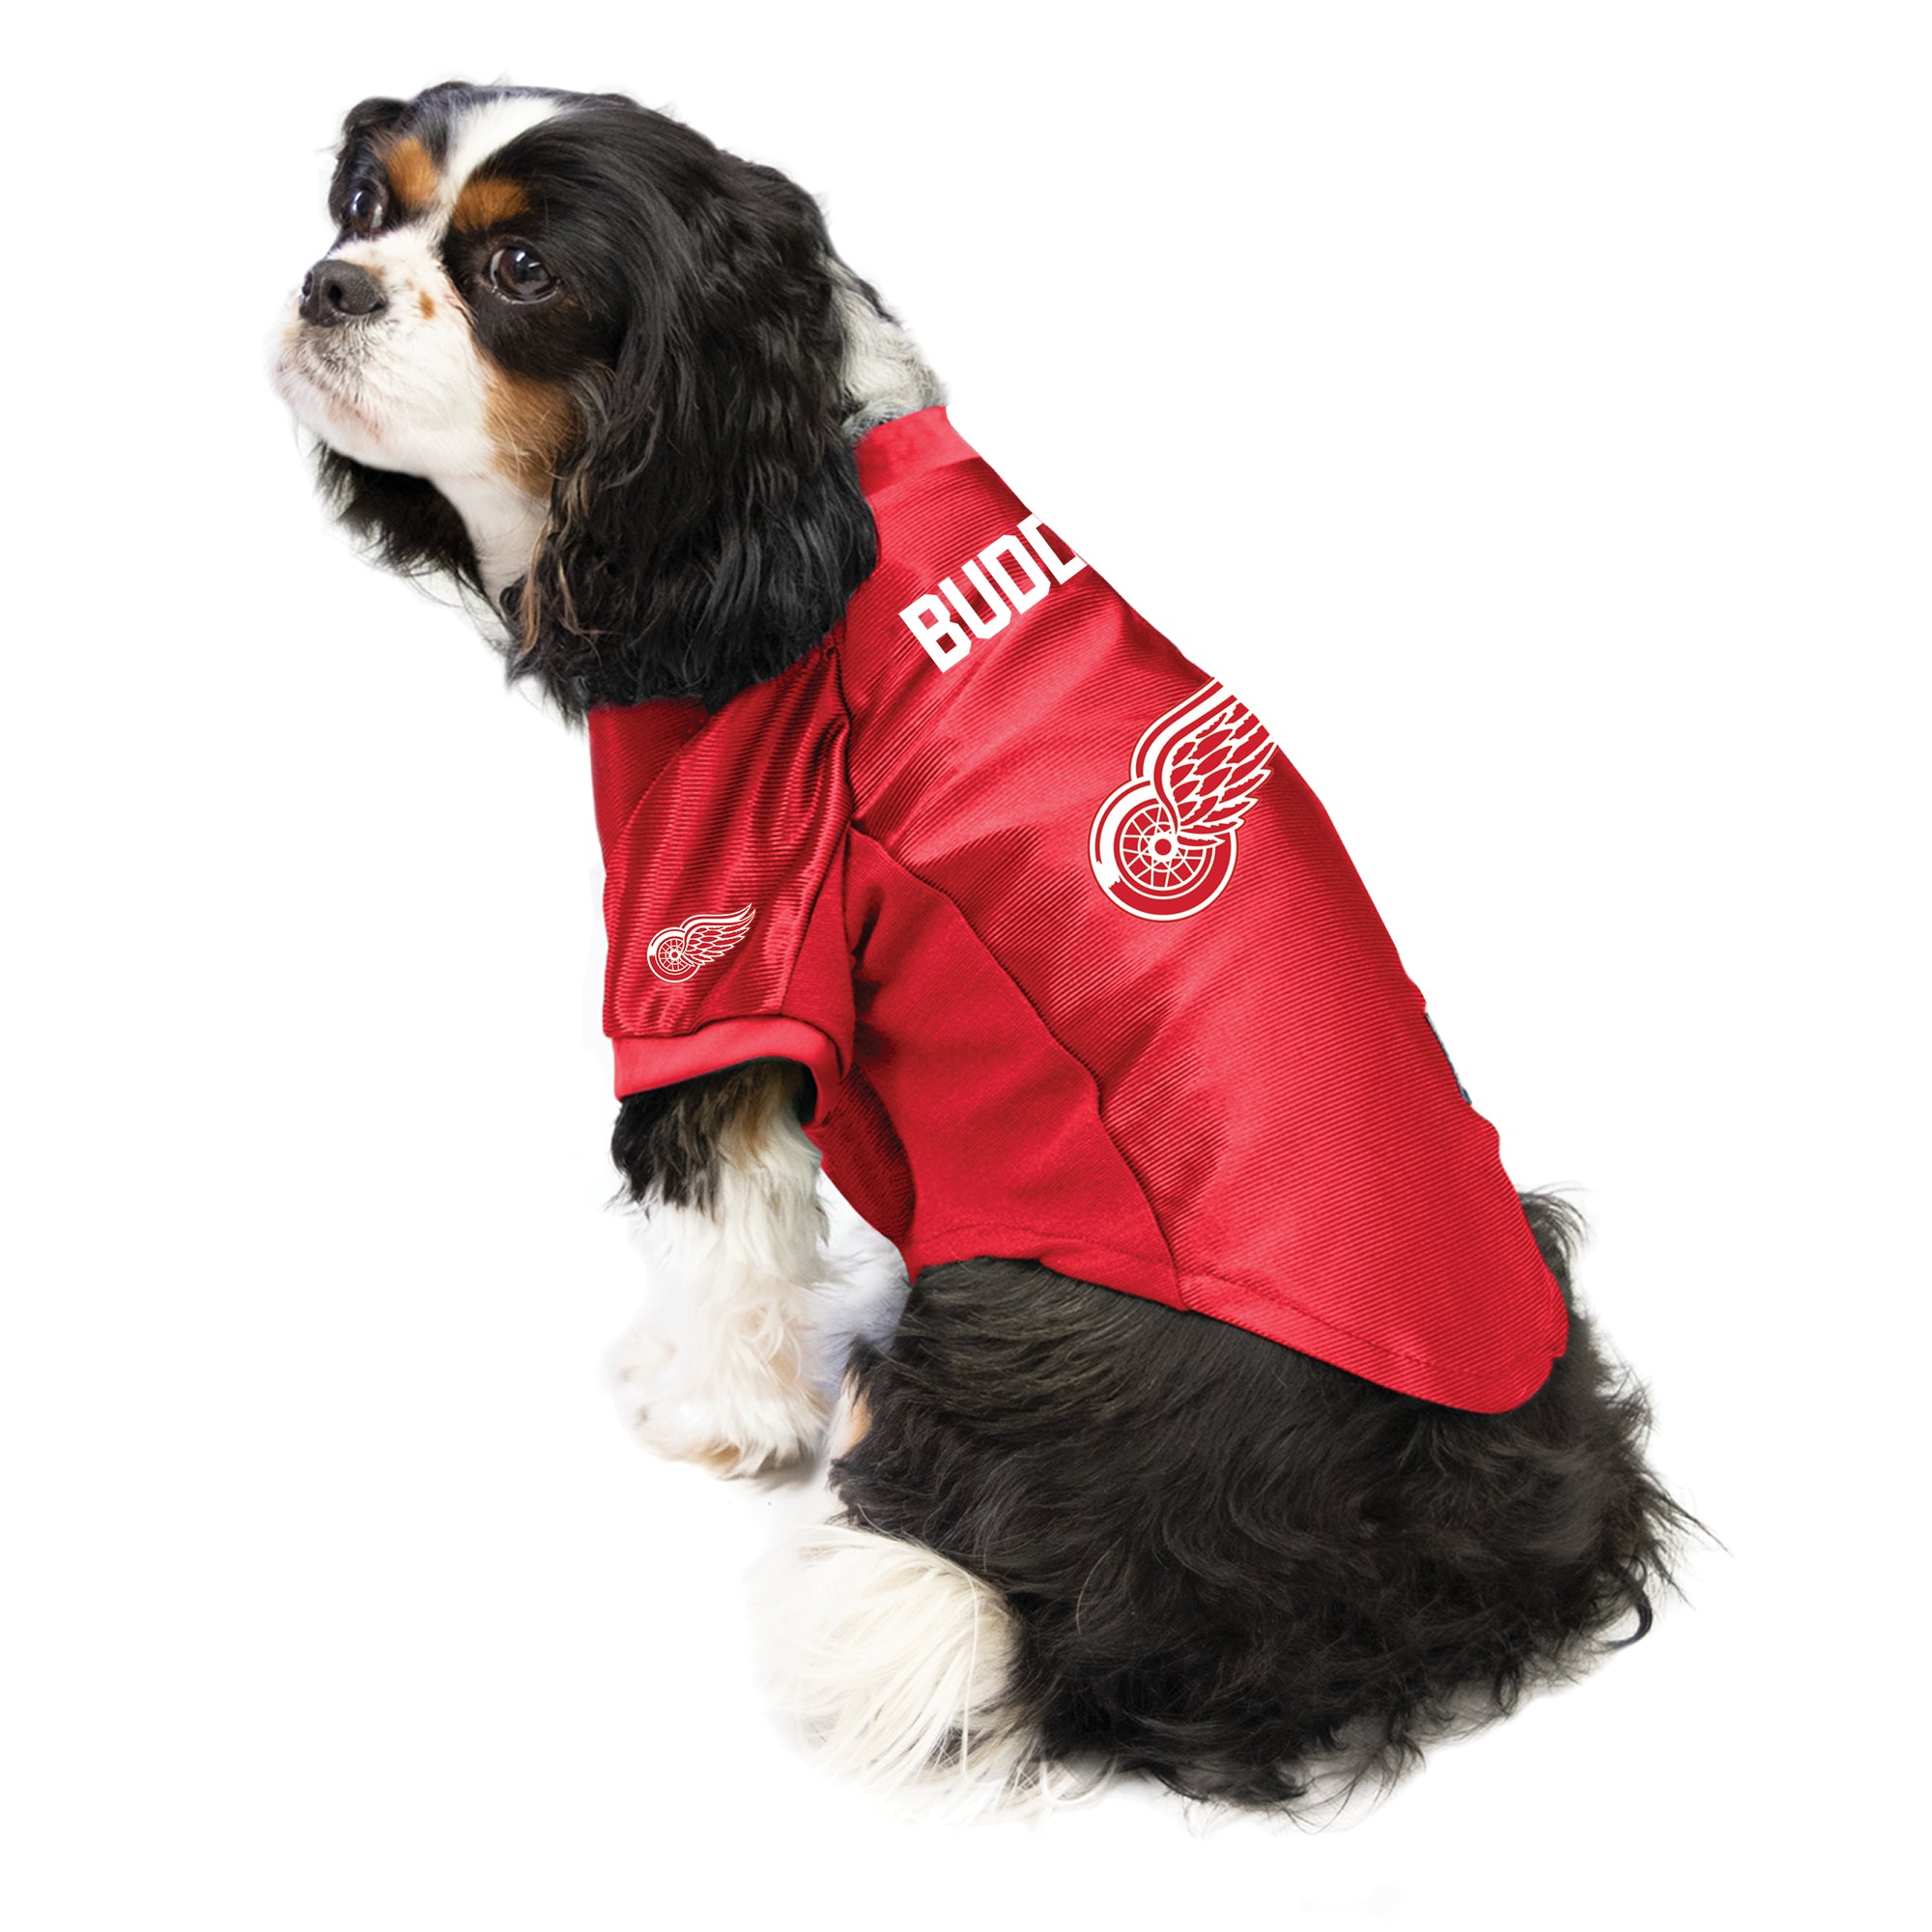 Detroit Red Wings Pet Jersey - Large